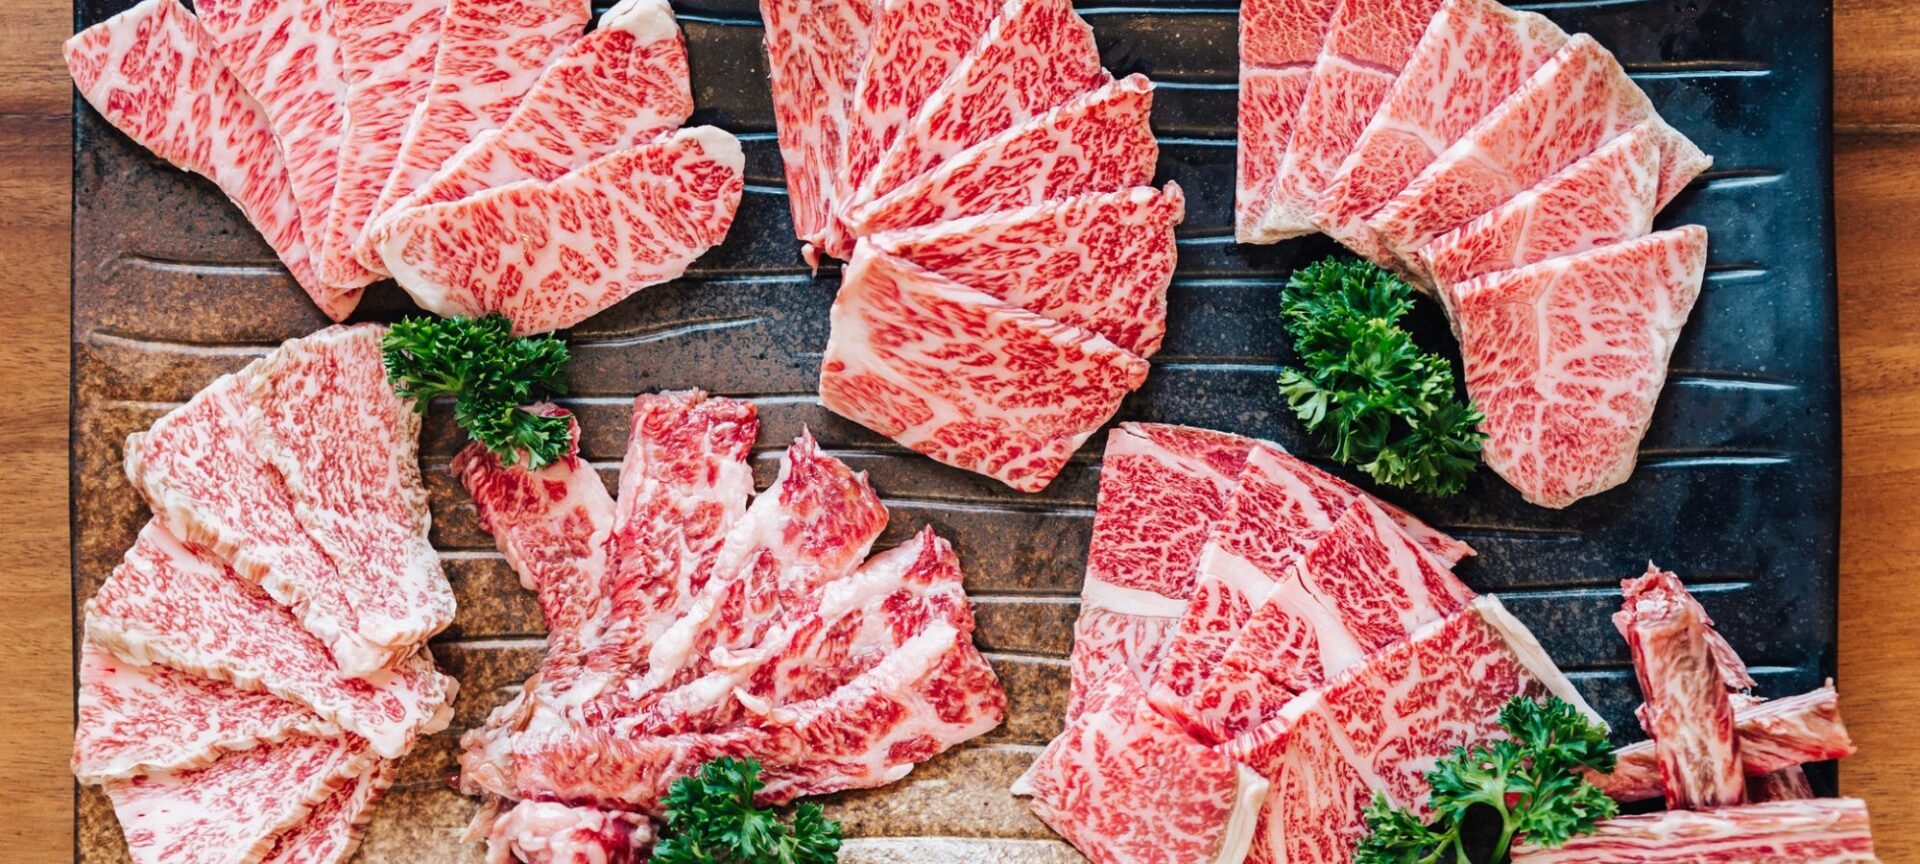 Texas Wagyu vs. Japanese Wagyu – Is There a Difference?